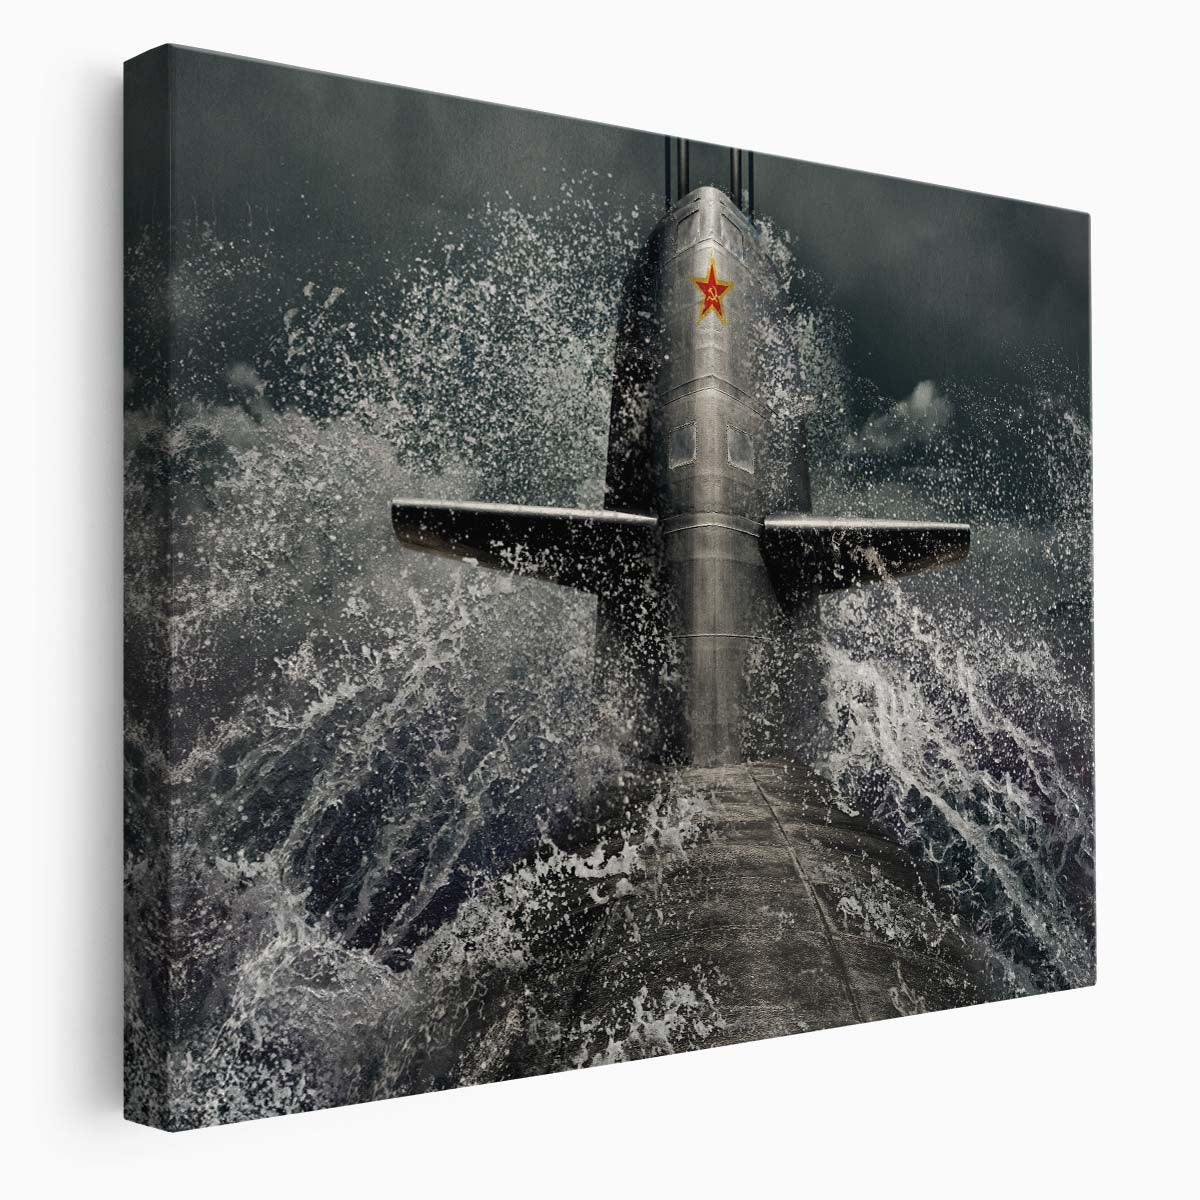 Soviet Submarine Emergence Dramatic Naval Wall Art by Luxuriance Designs. Made in USA.